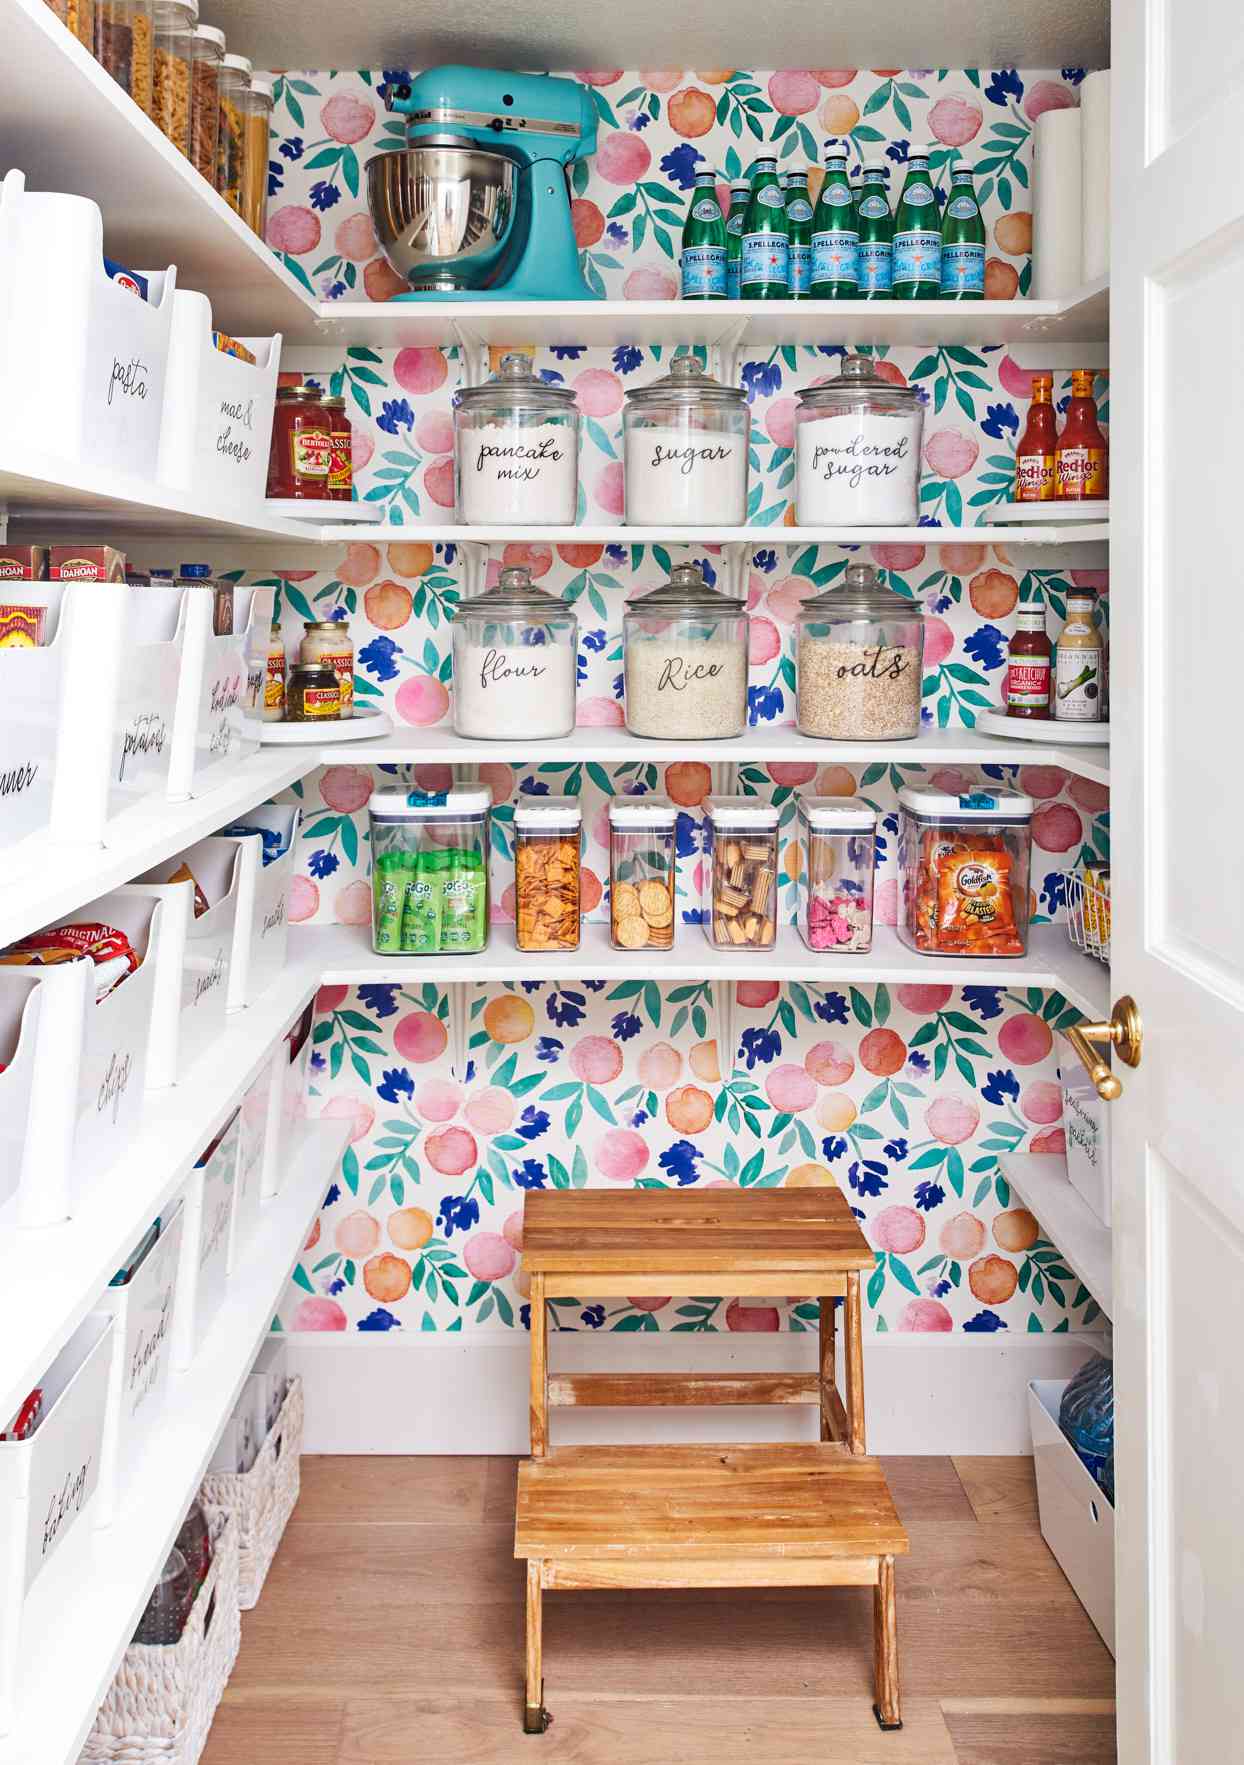 organized pantry with colorful wallpaper